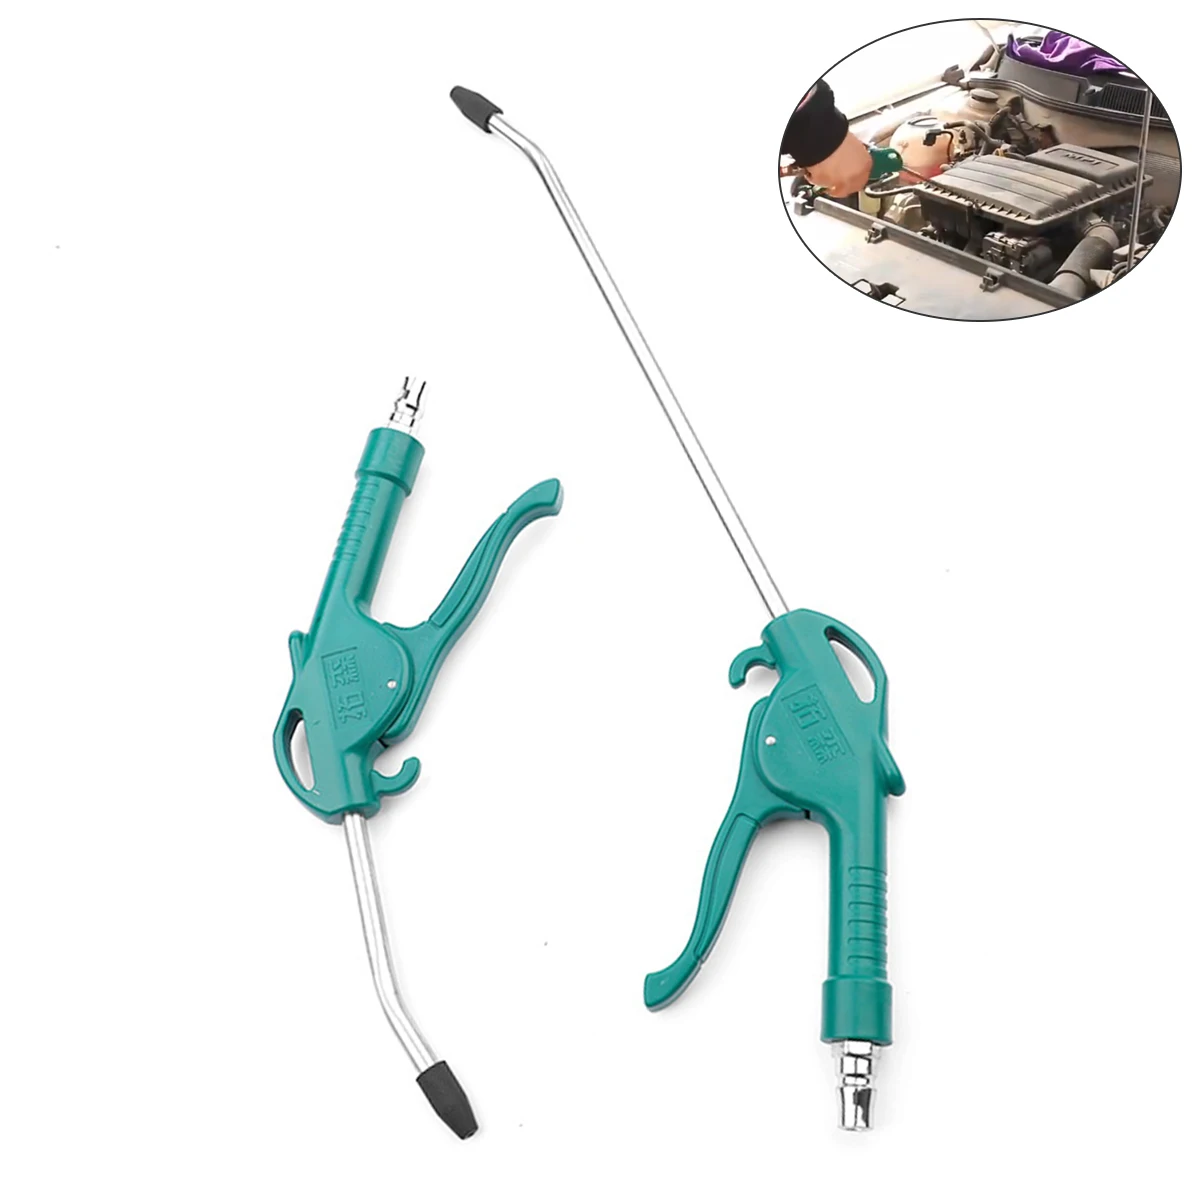 High-pressure Air Blow Gun Pistol Trigger Cleaner Compressor Dust Blower Nozzle Pneumatic Cleaning Tool for Other Machines pneumatic air blow guns triggers cleaner compressor dust blower nozzle pneumatic dropship